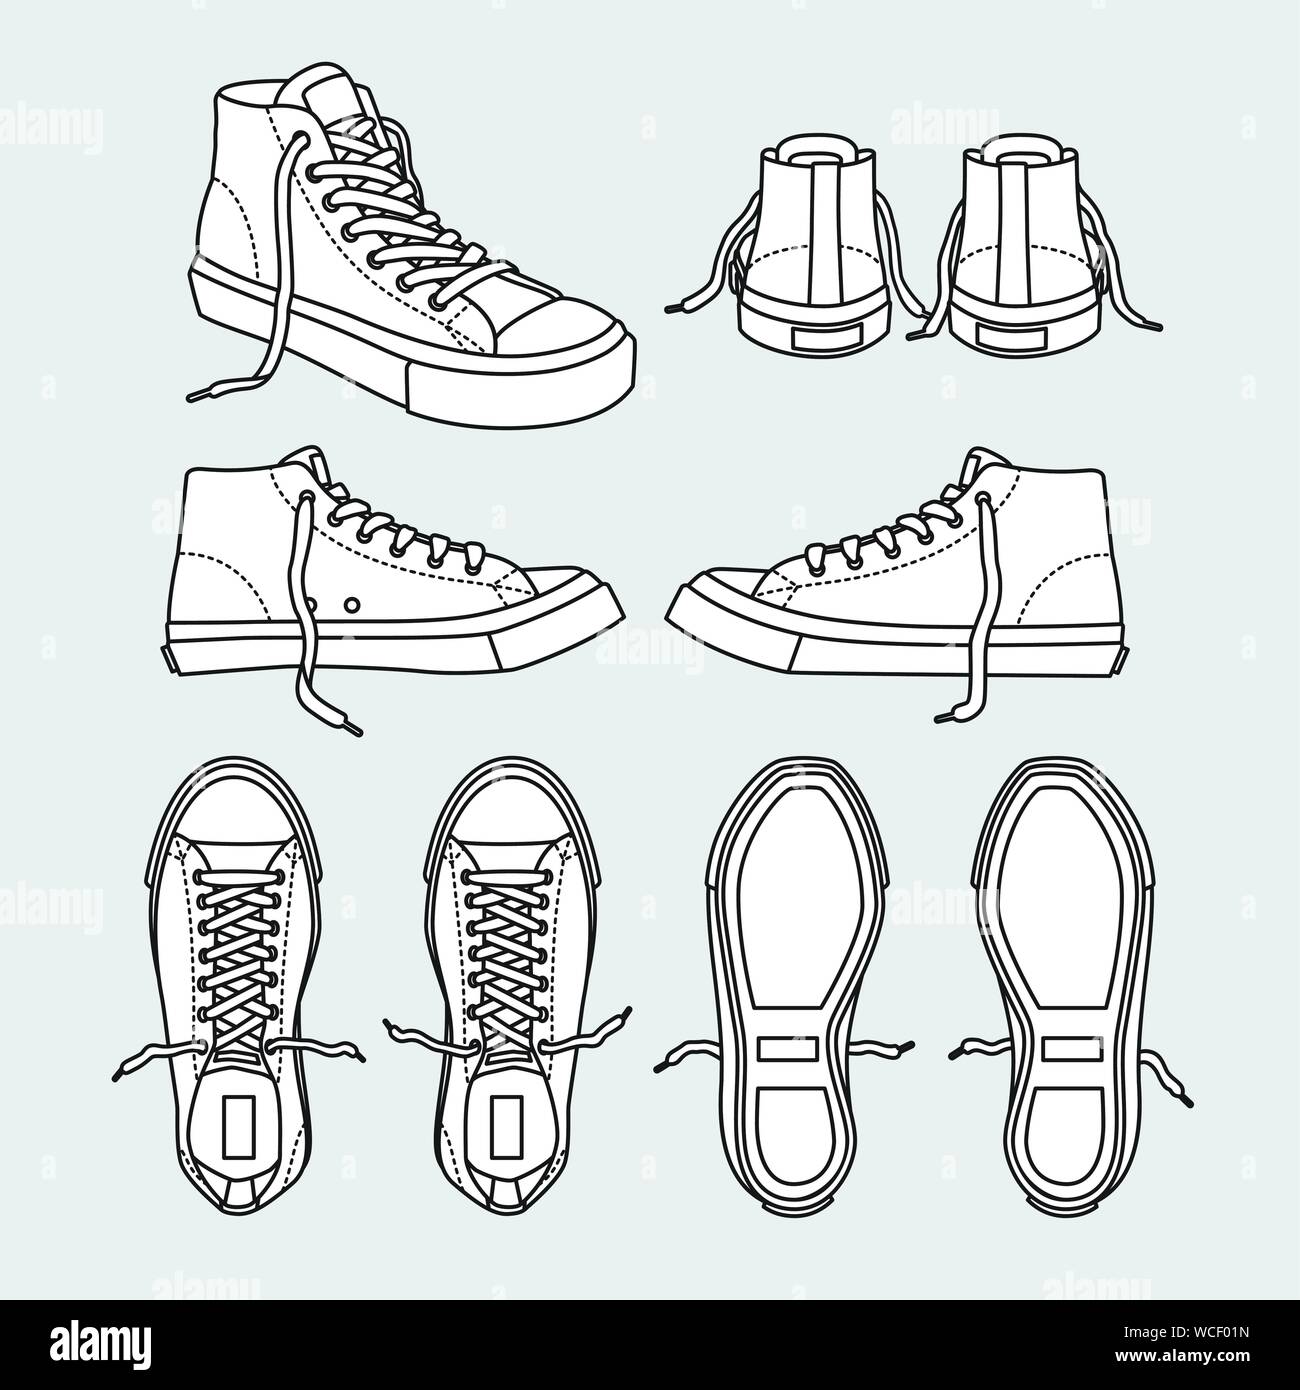 Converse Shoes Black And White: Over 152 Royalty-Free Licensable Stock  Vectors & Vector Art | Shutterstock